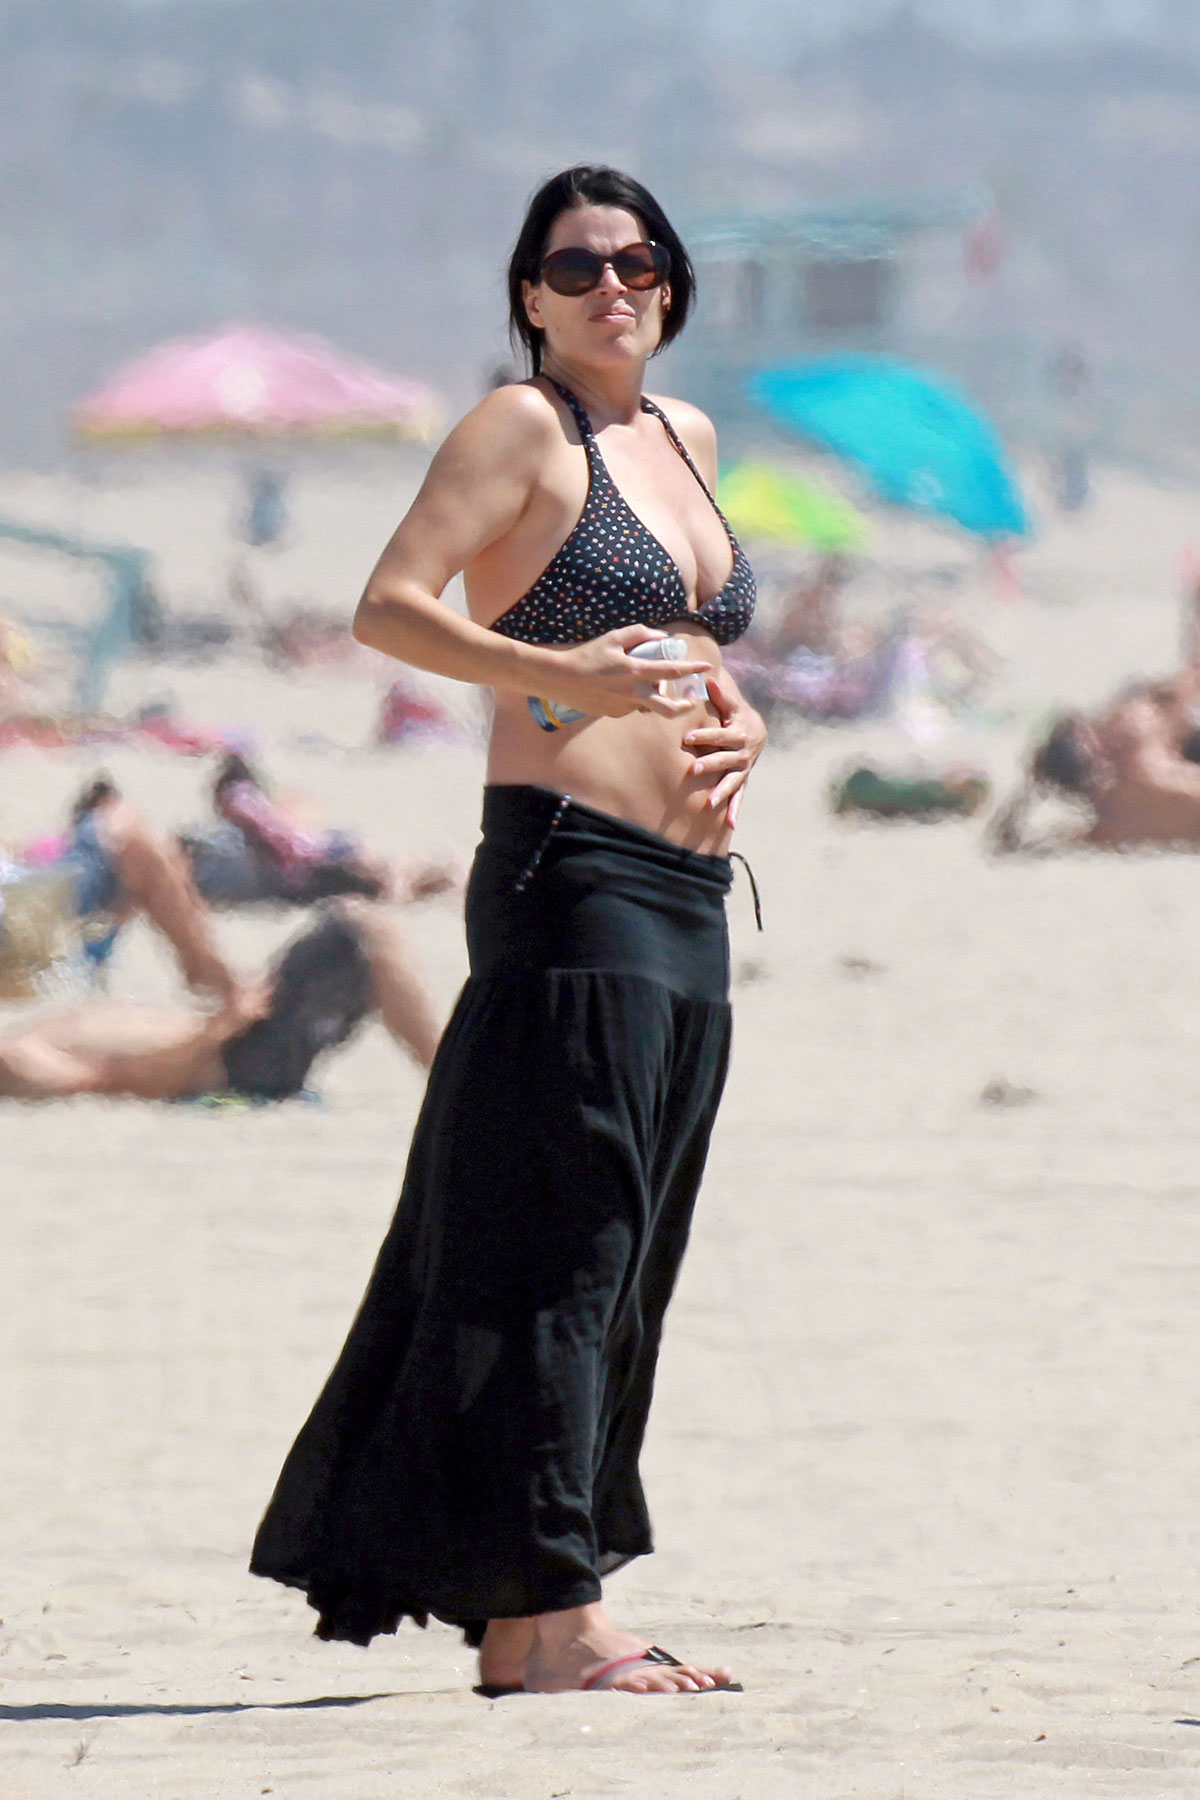 NEVE CAMPBELL in Bikini Top at a Beach in Los Angeles.